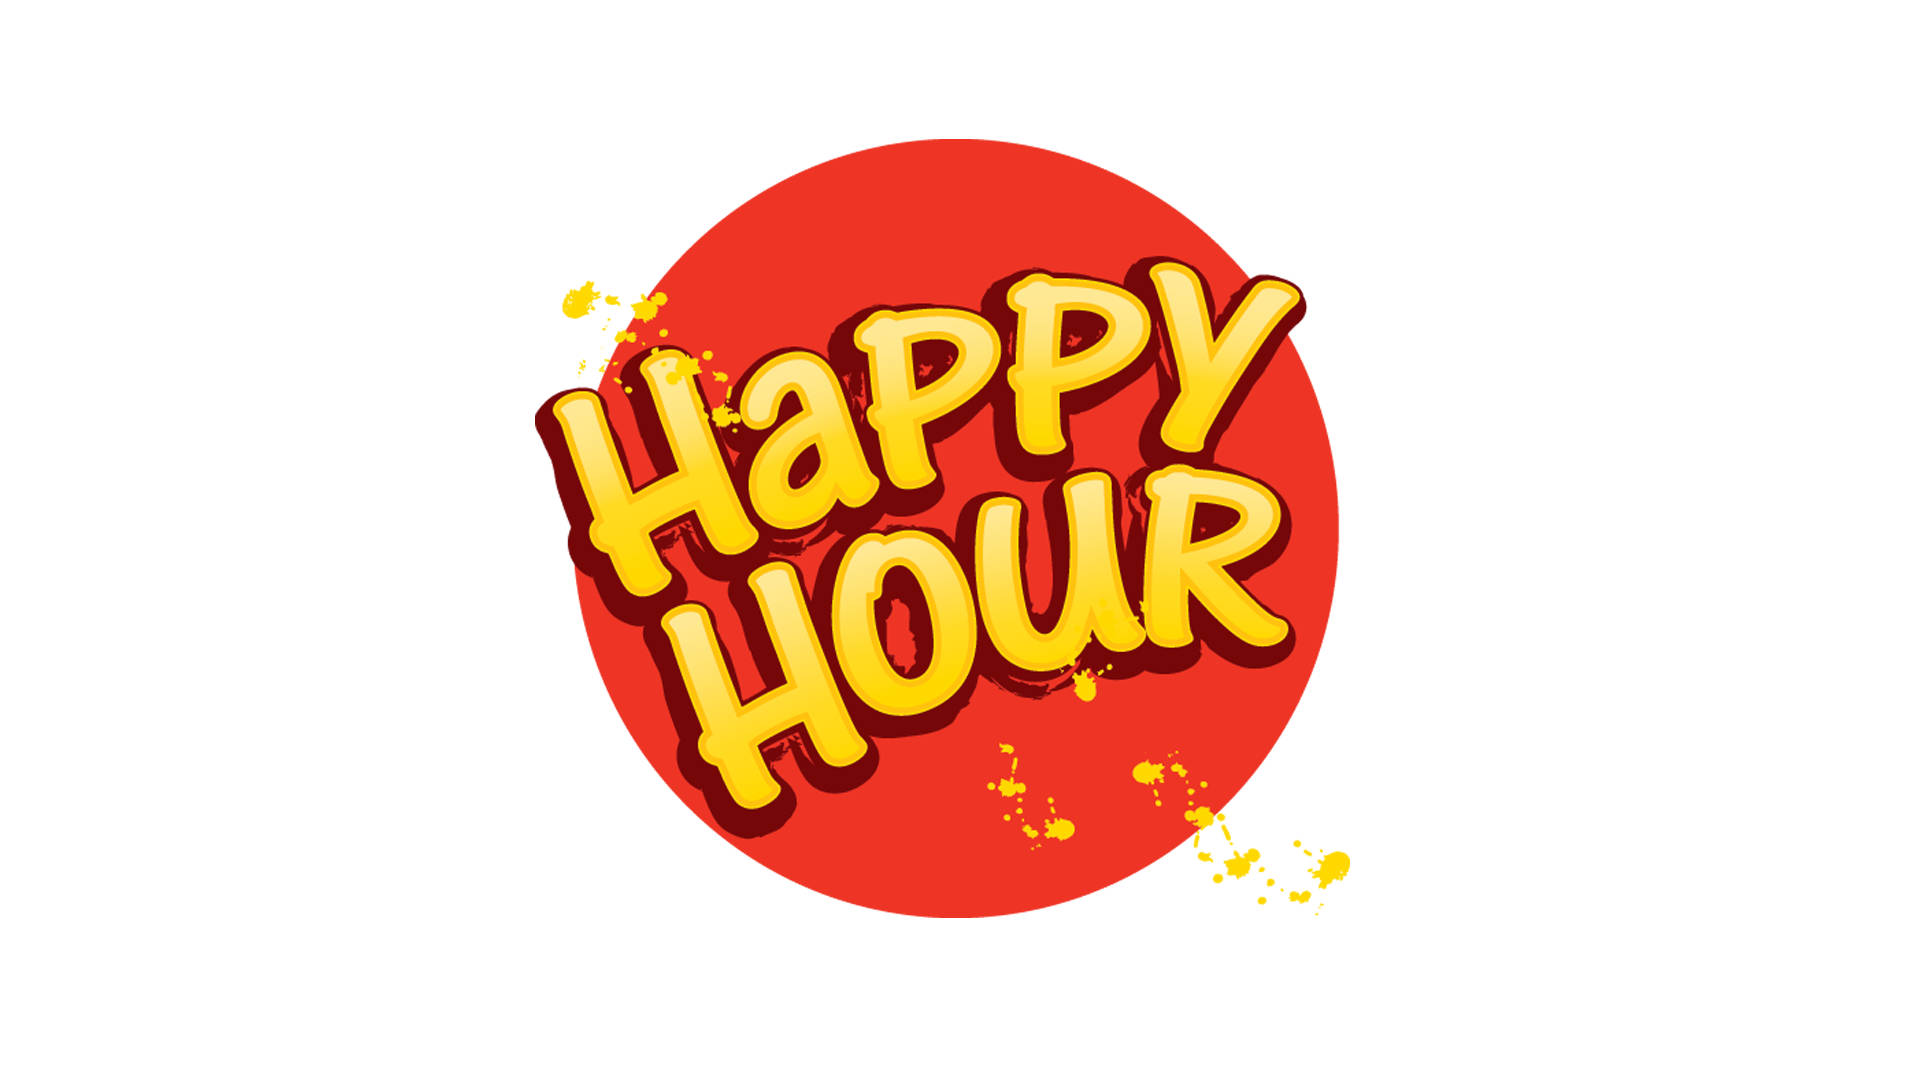 Free Happy Hour Wallpaper Downloads, [100+] Happy Hour Wallpapers for FREE  